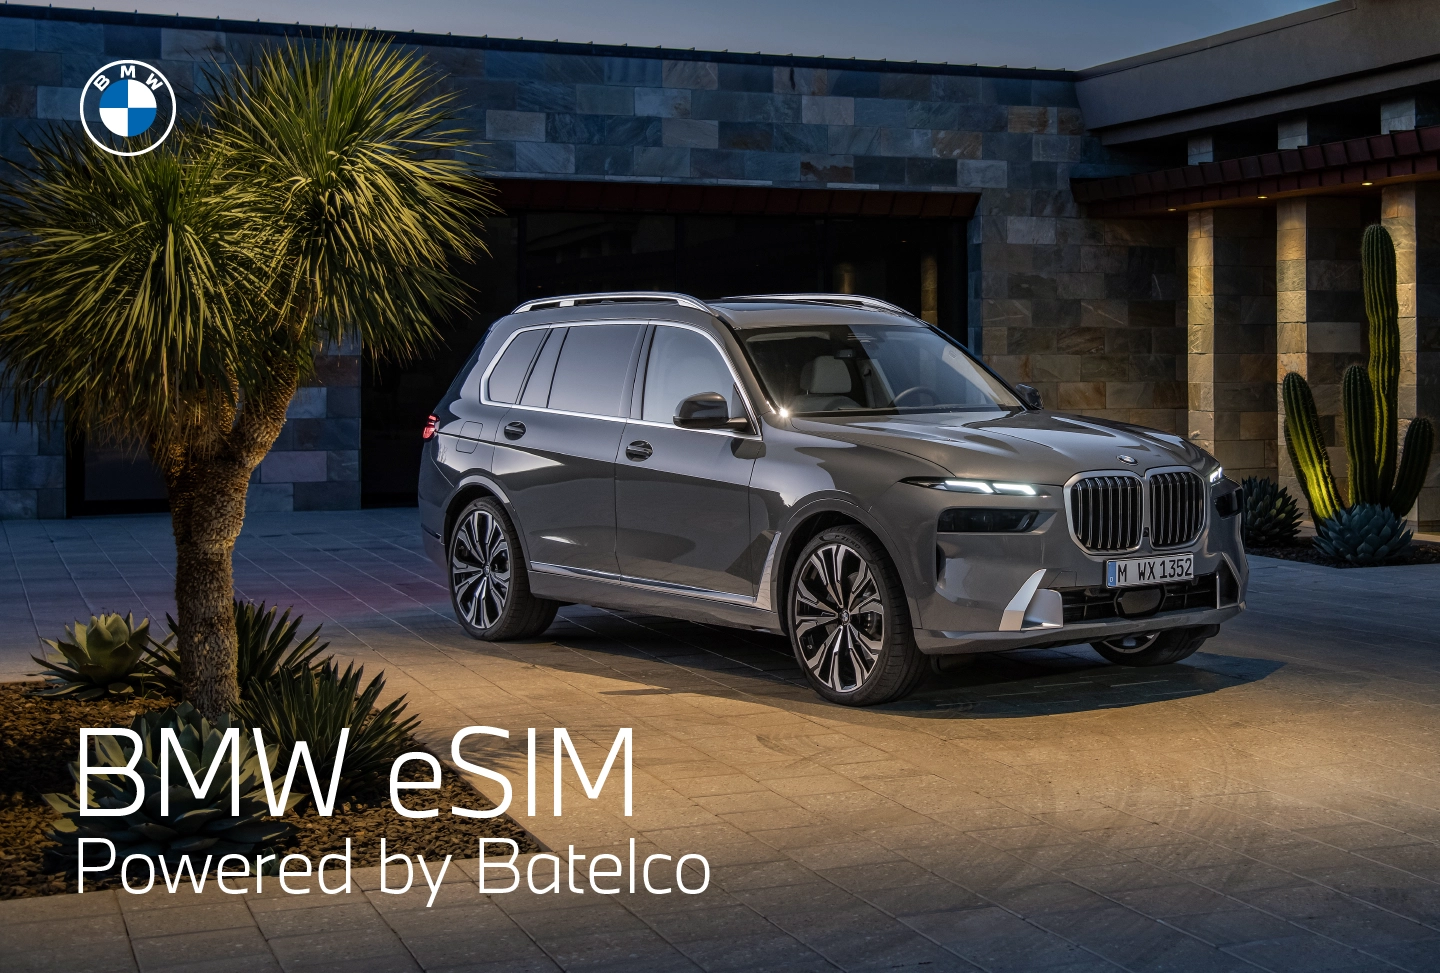 Elevate your BMW experience with Batelco; rated as best Network Quality and Speed Experience.*